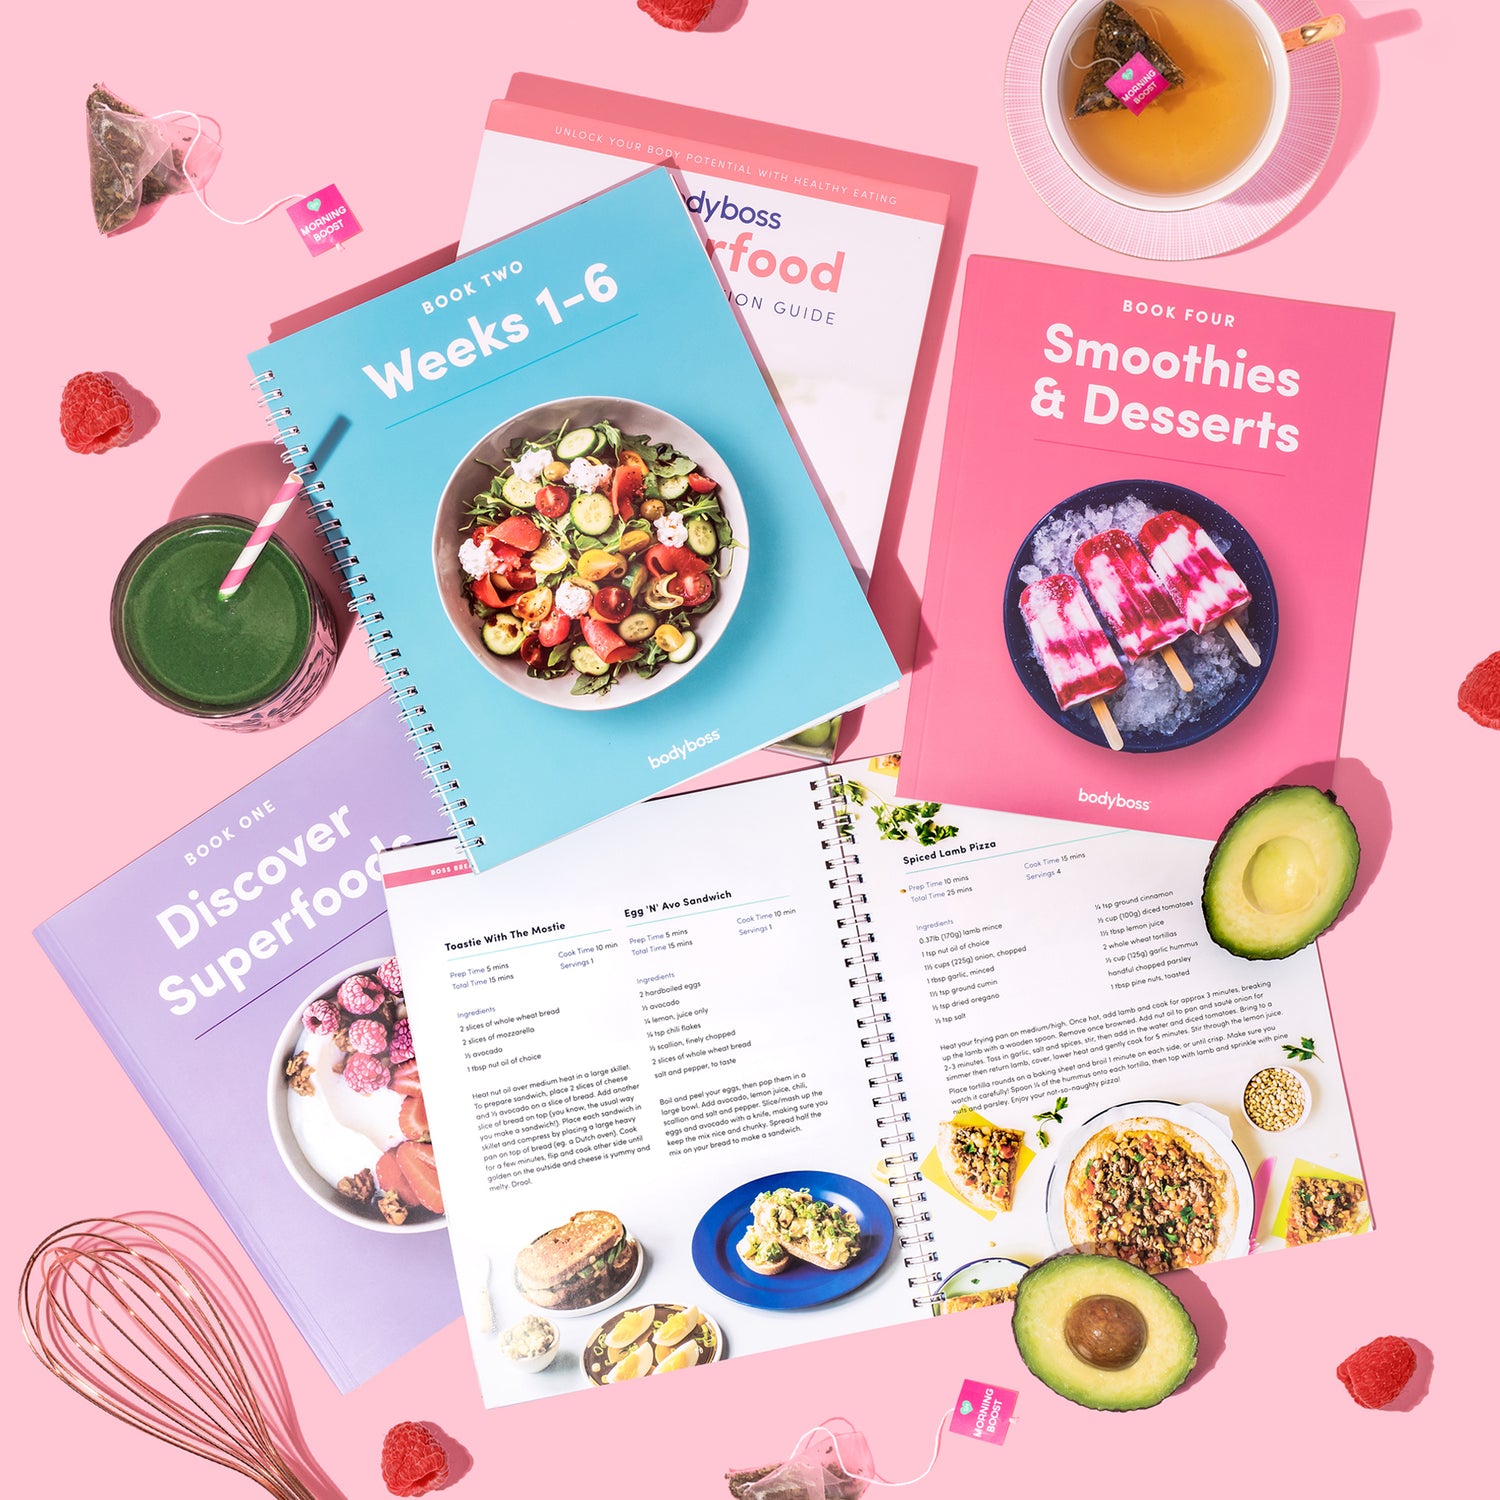 BodyBoss Superfood Nutrition Guide Open Book